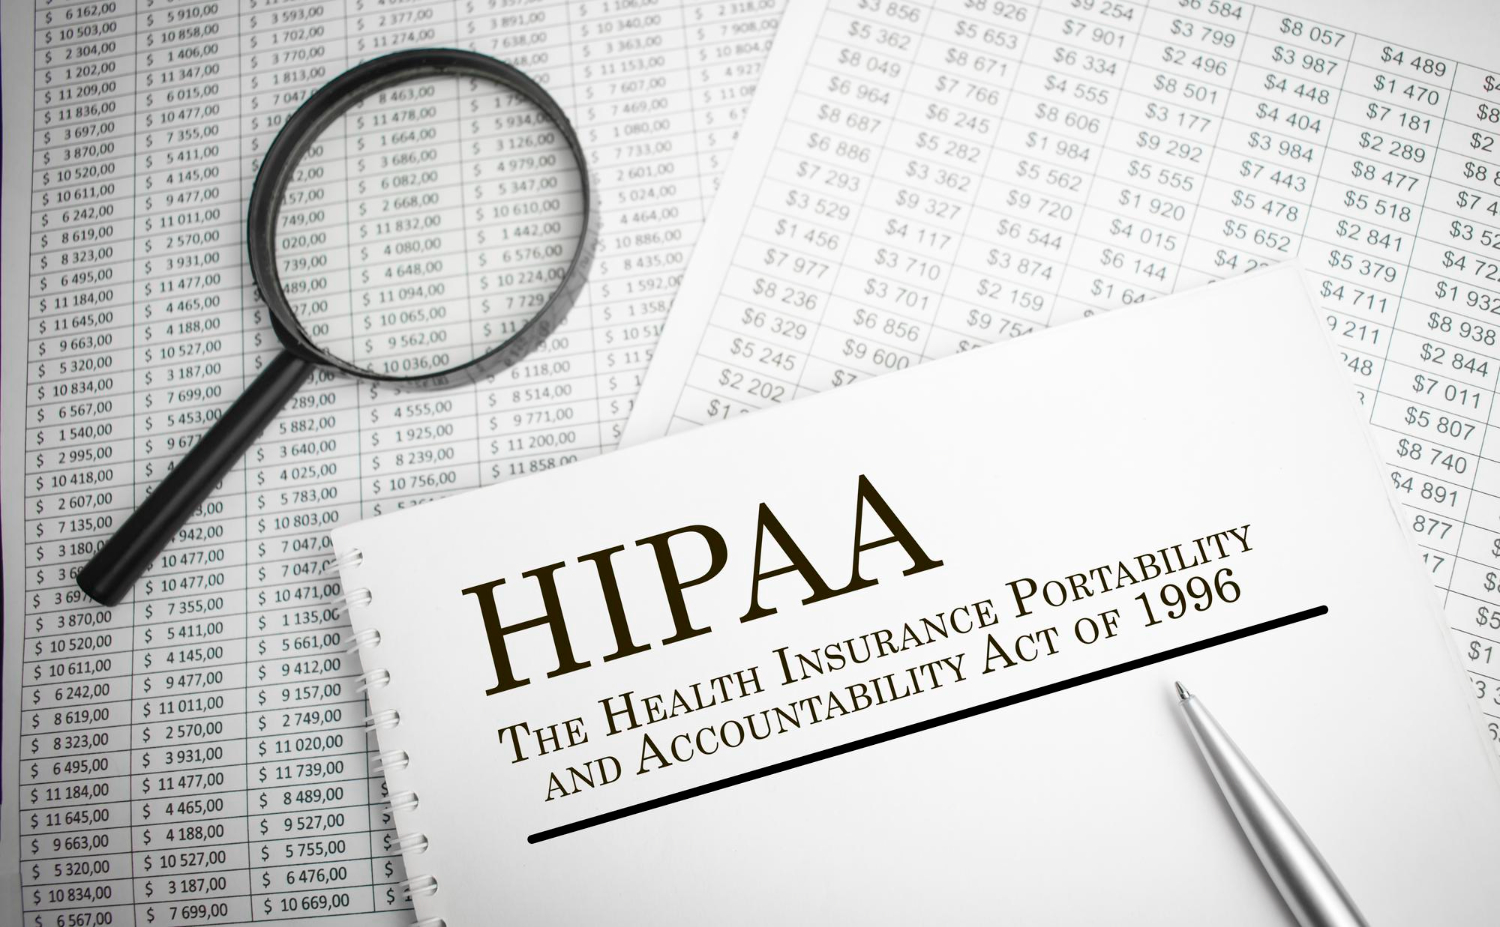 paper-with-hipaa-health-insurance-portability-accountability-act-1996-table